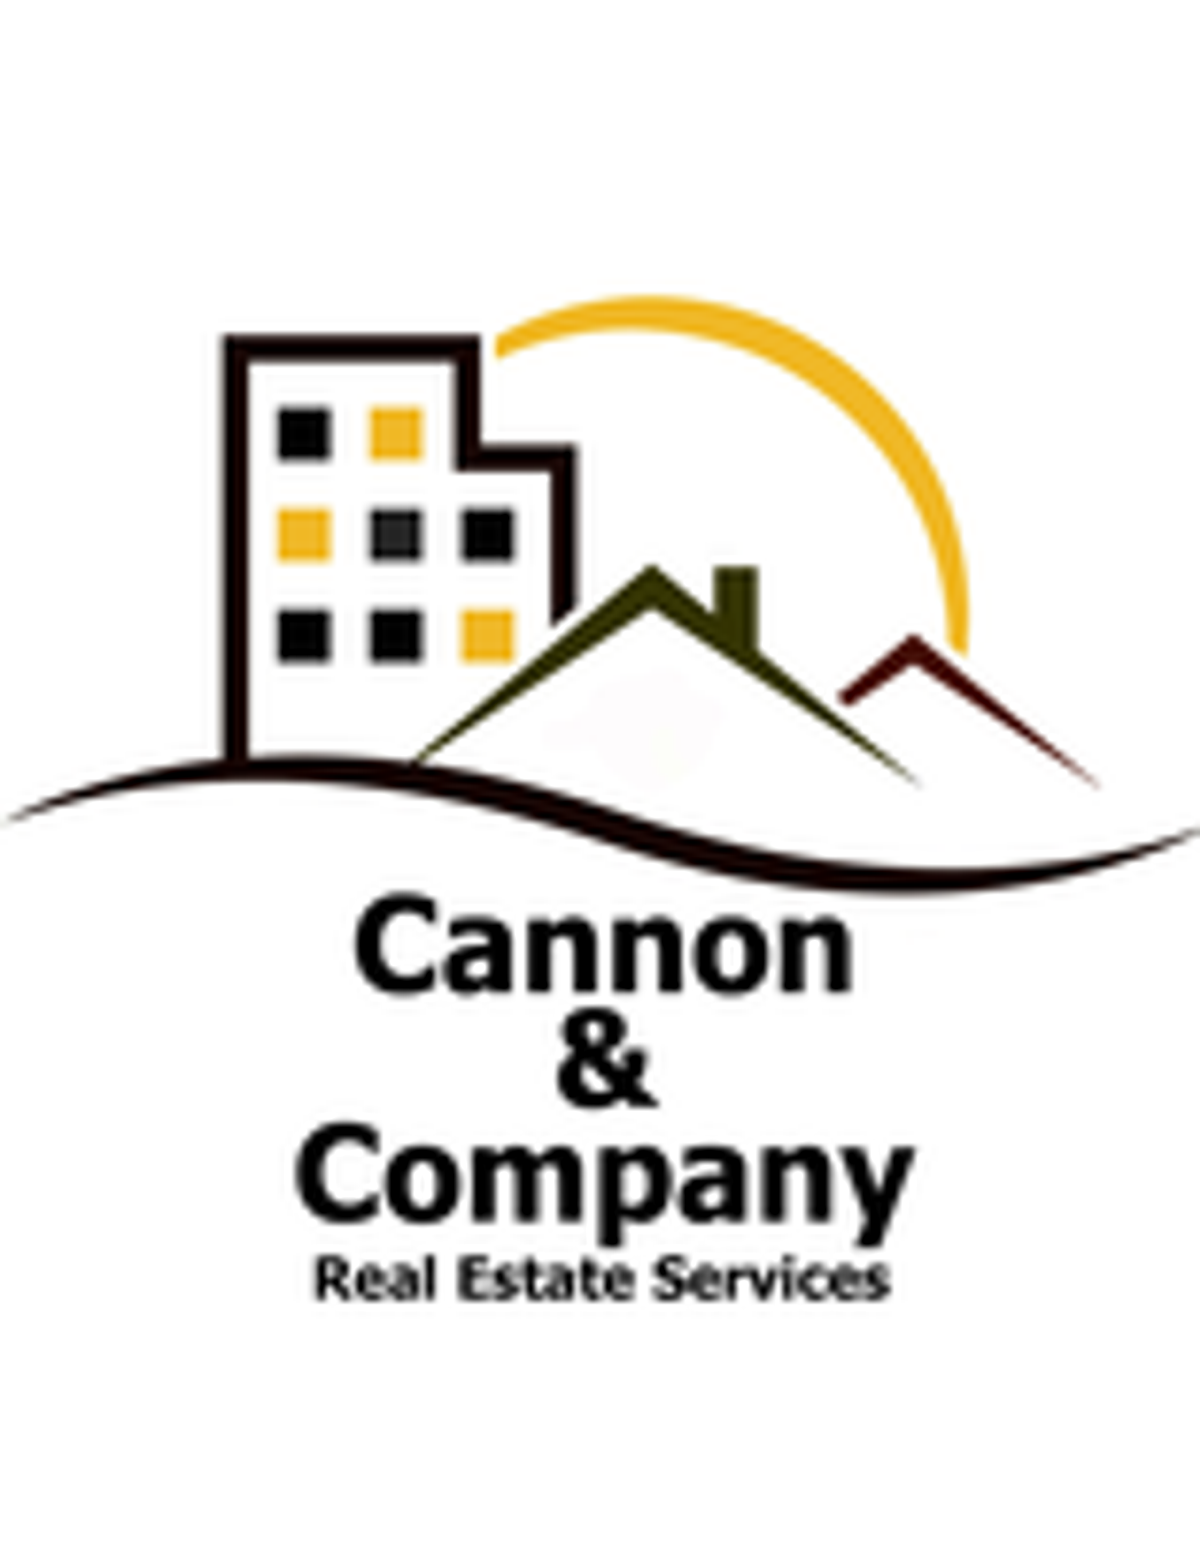 Photo for Jodie Simpson, Listing Agent at Cannon & Company